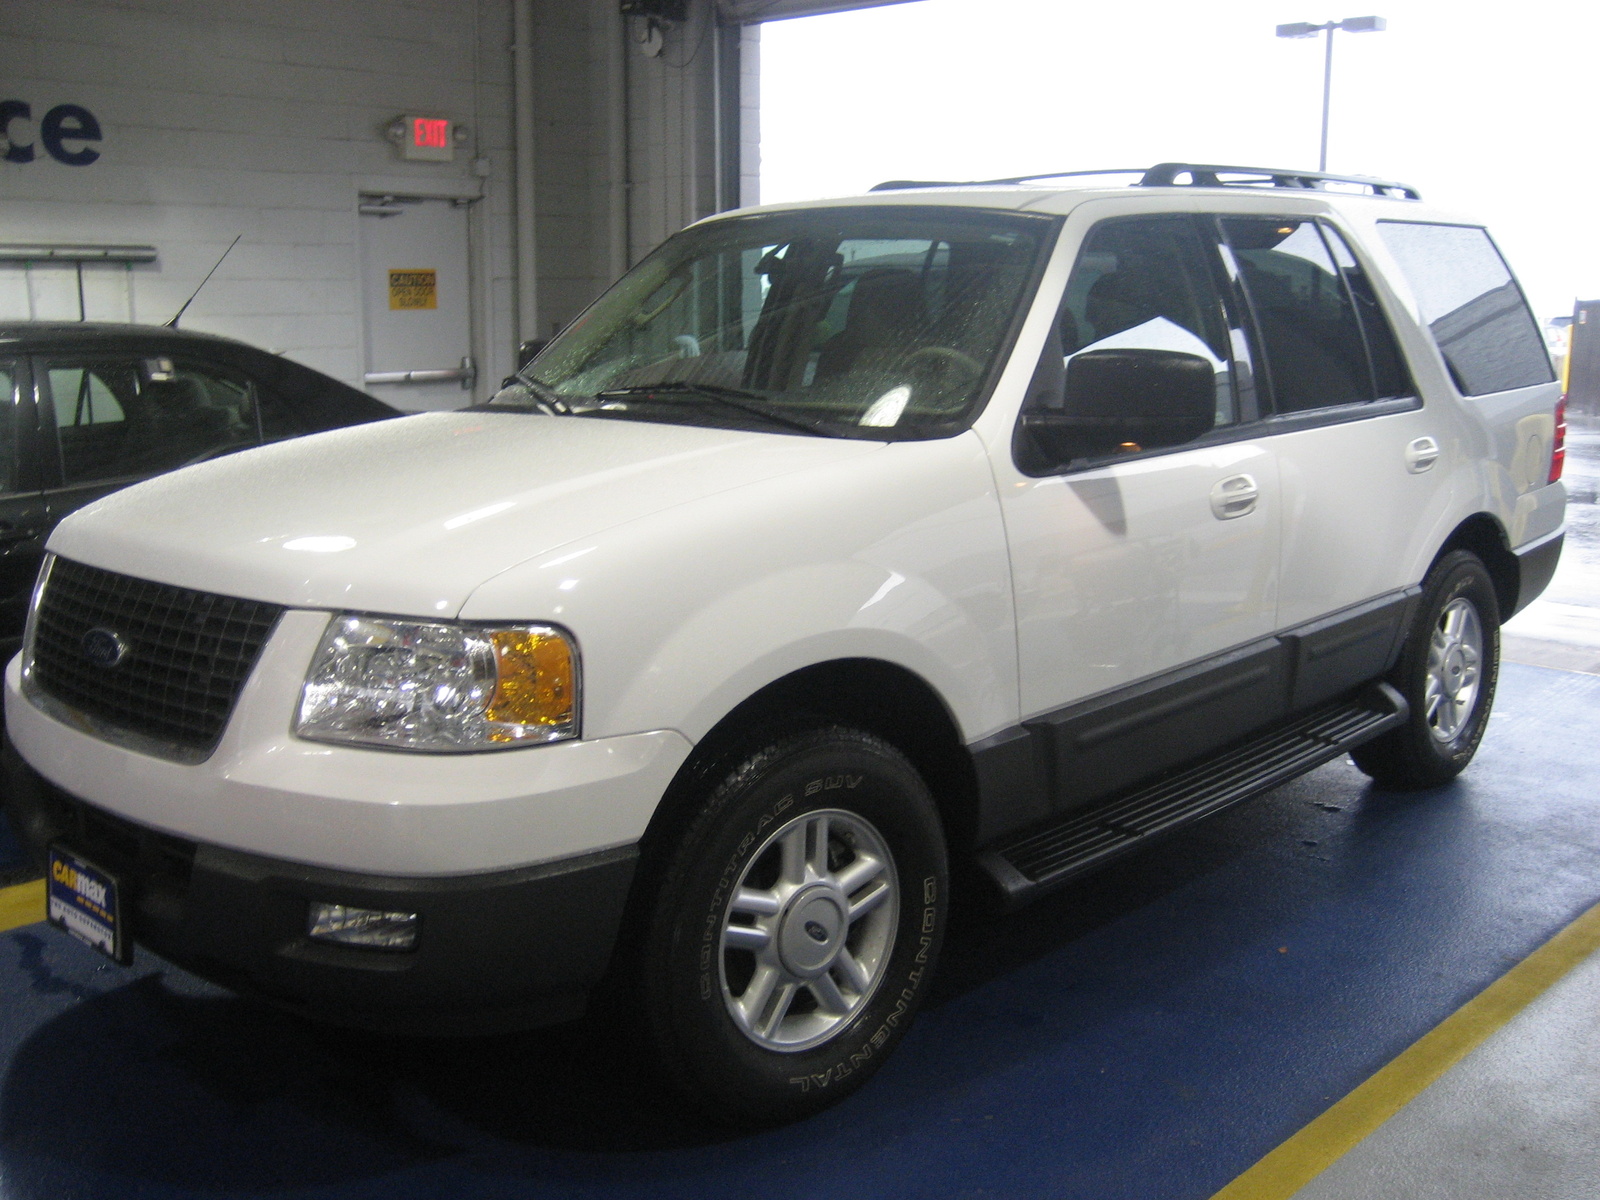 2005 Ford expedition xlt reviews #2